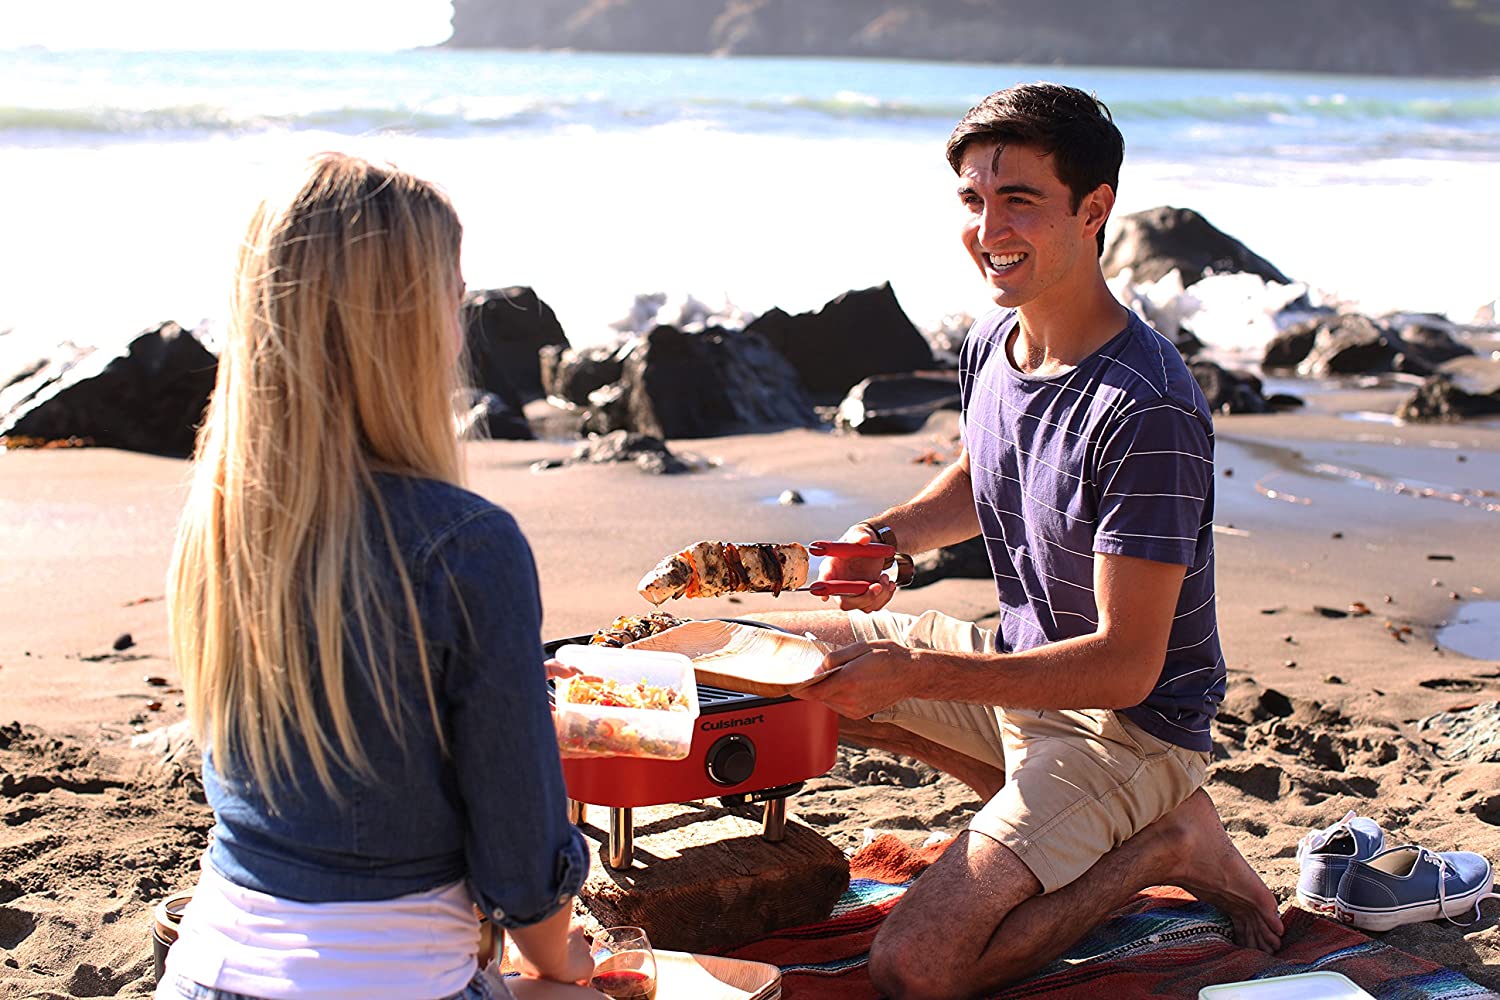 two people grilling on a beach